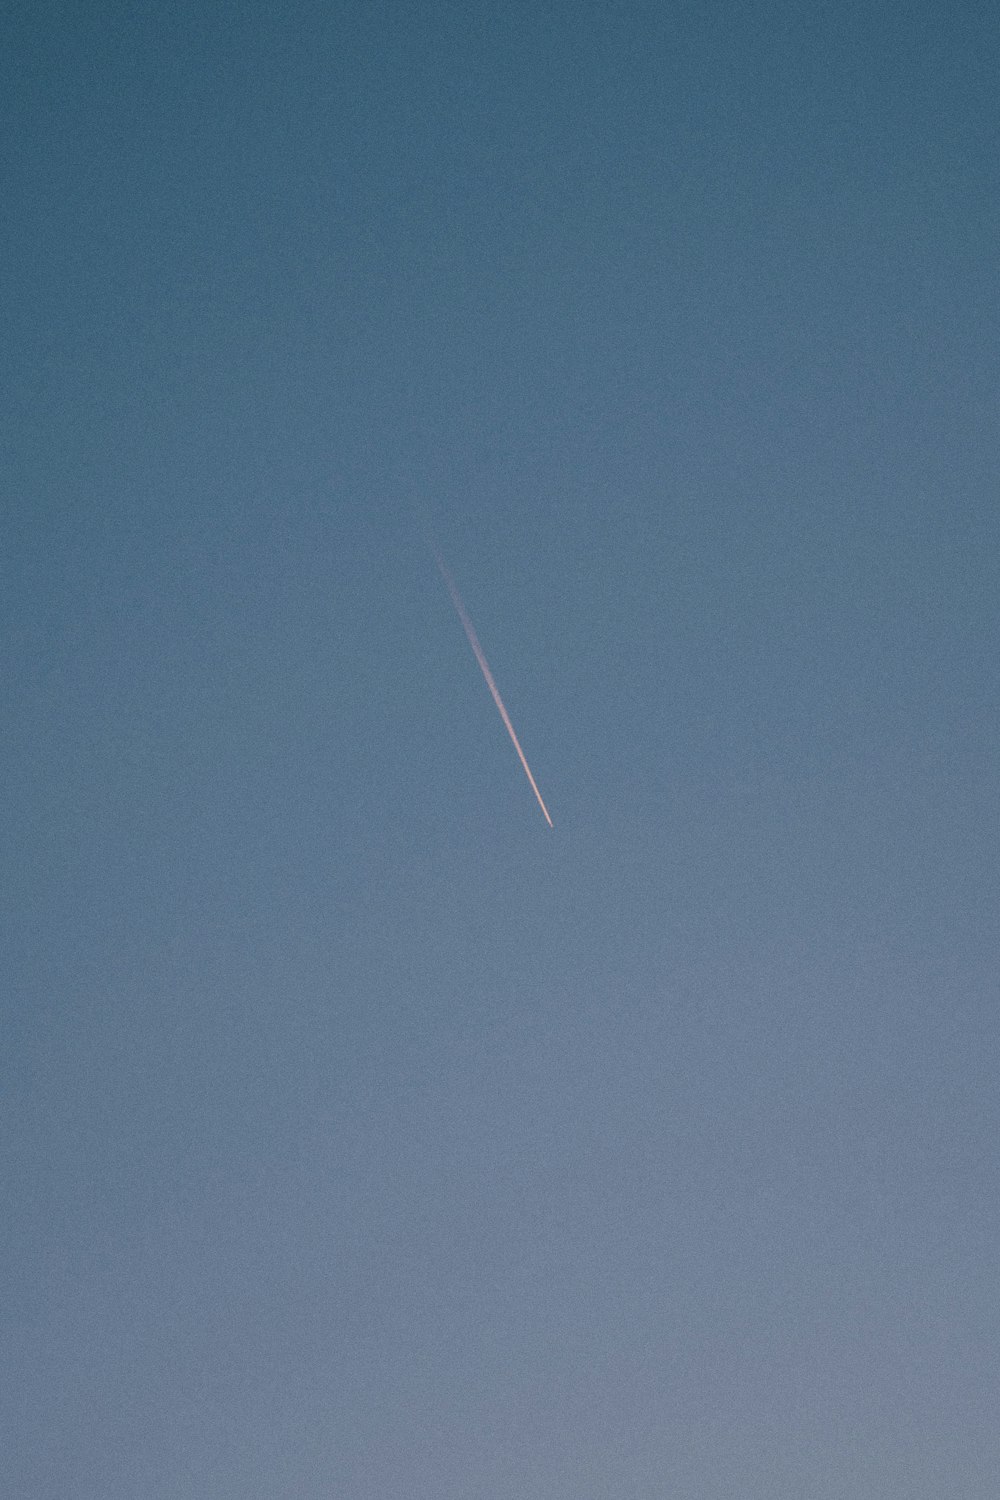 a jet flying in the sky